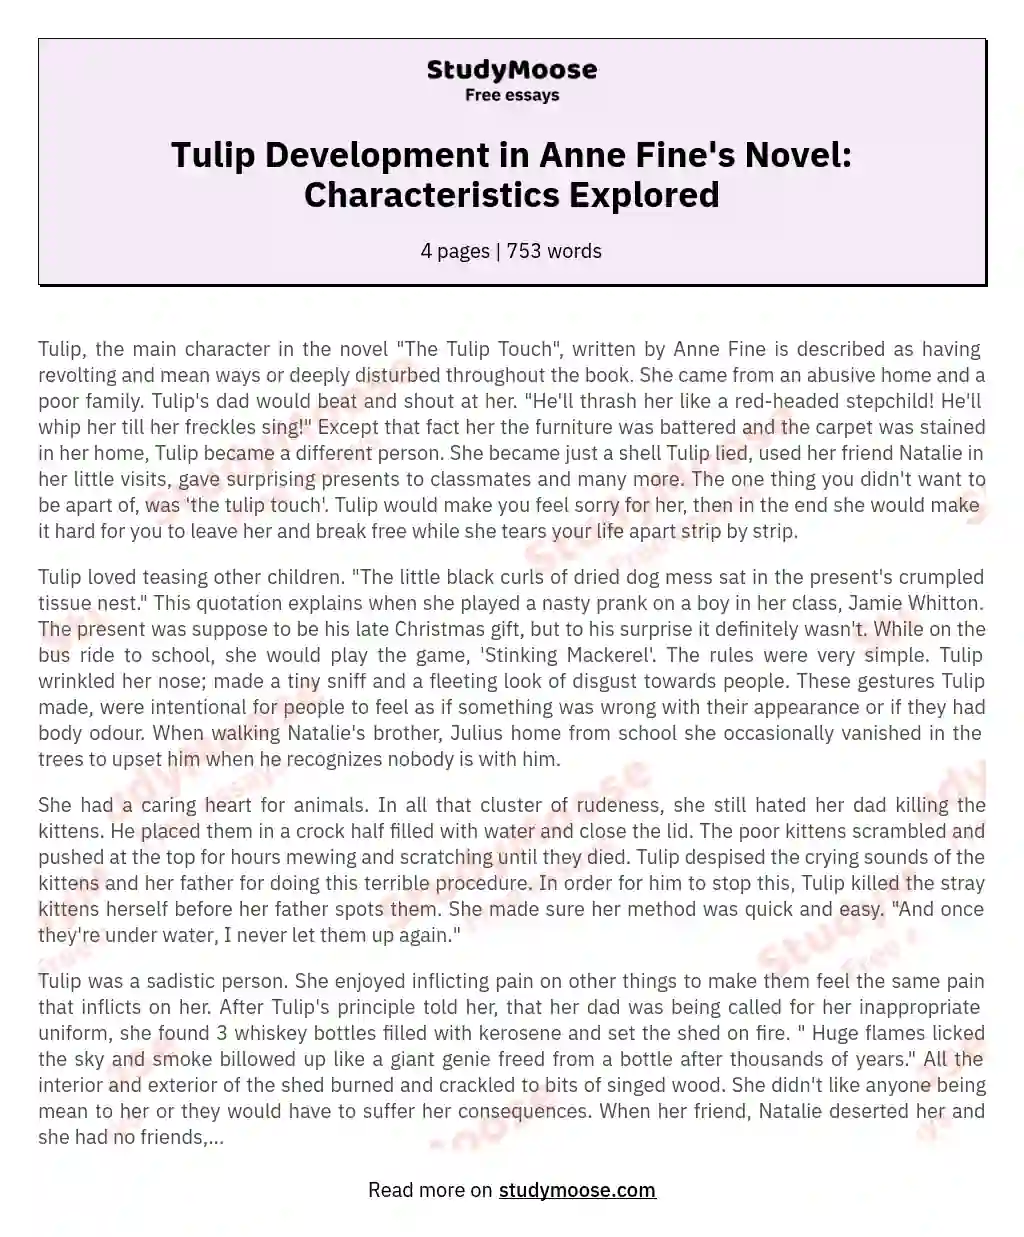 The Characteristics of Tulip and How it Developed in The Novel "The Tulip Touch" by Anne Fine